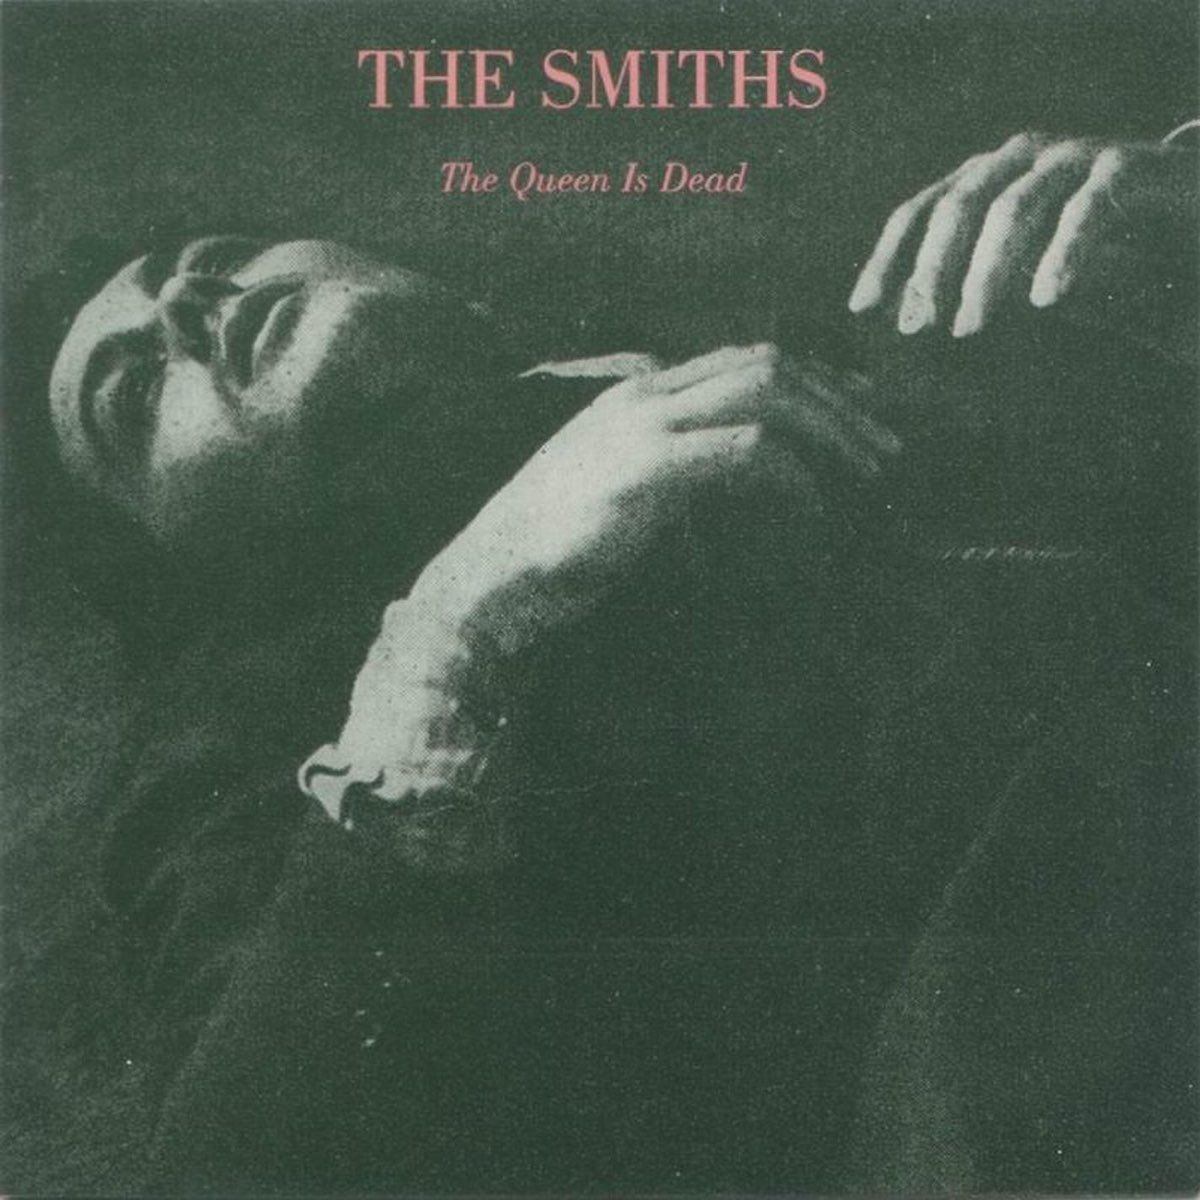 The Smiths — Never Had No One Ever cover artwork